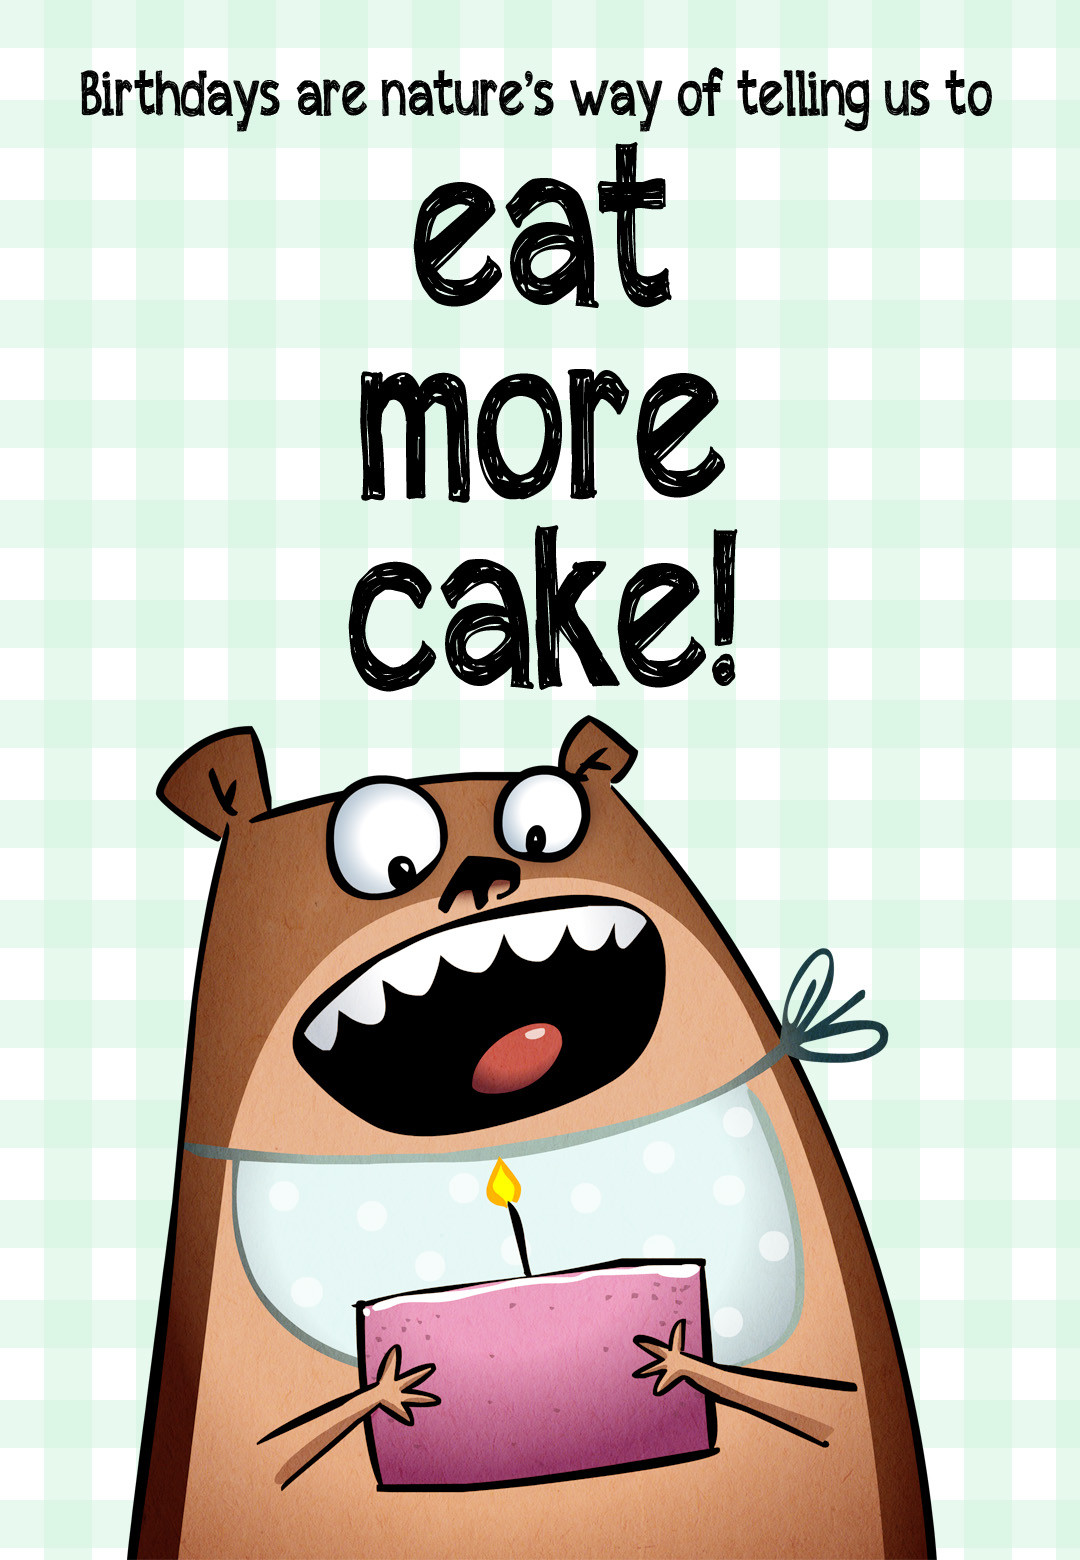 Happy Birthday Cards Funny
 Eat More Cake Free Birthday Card